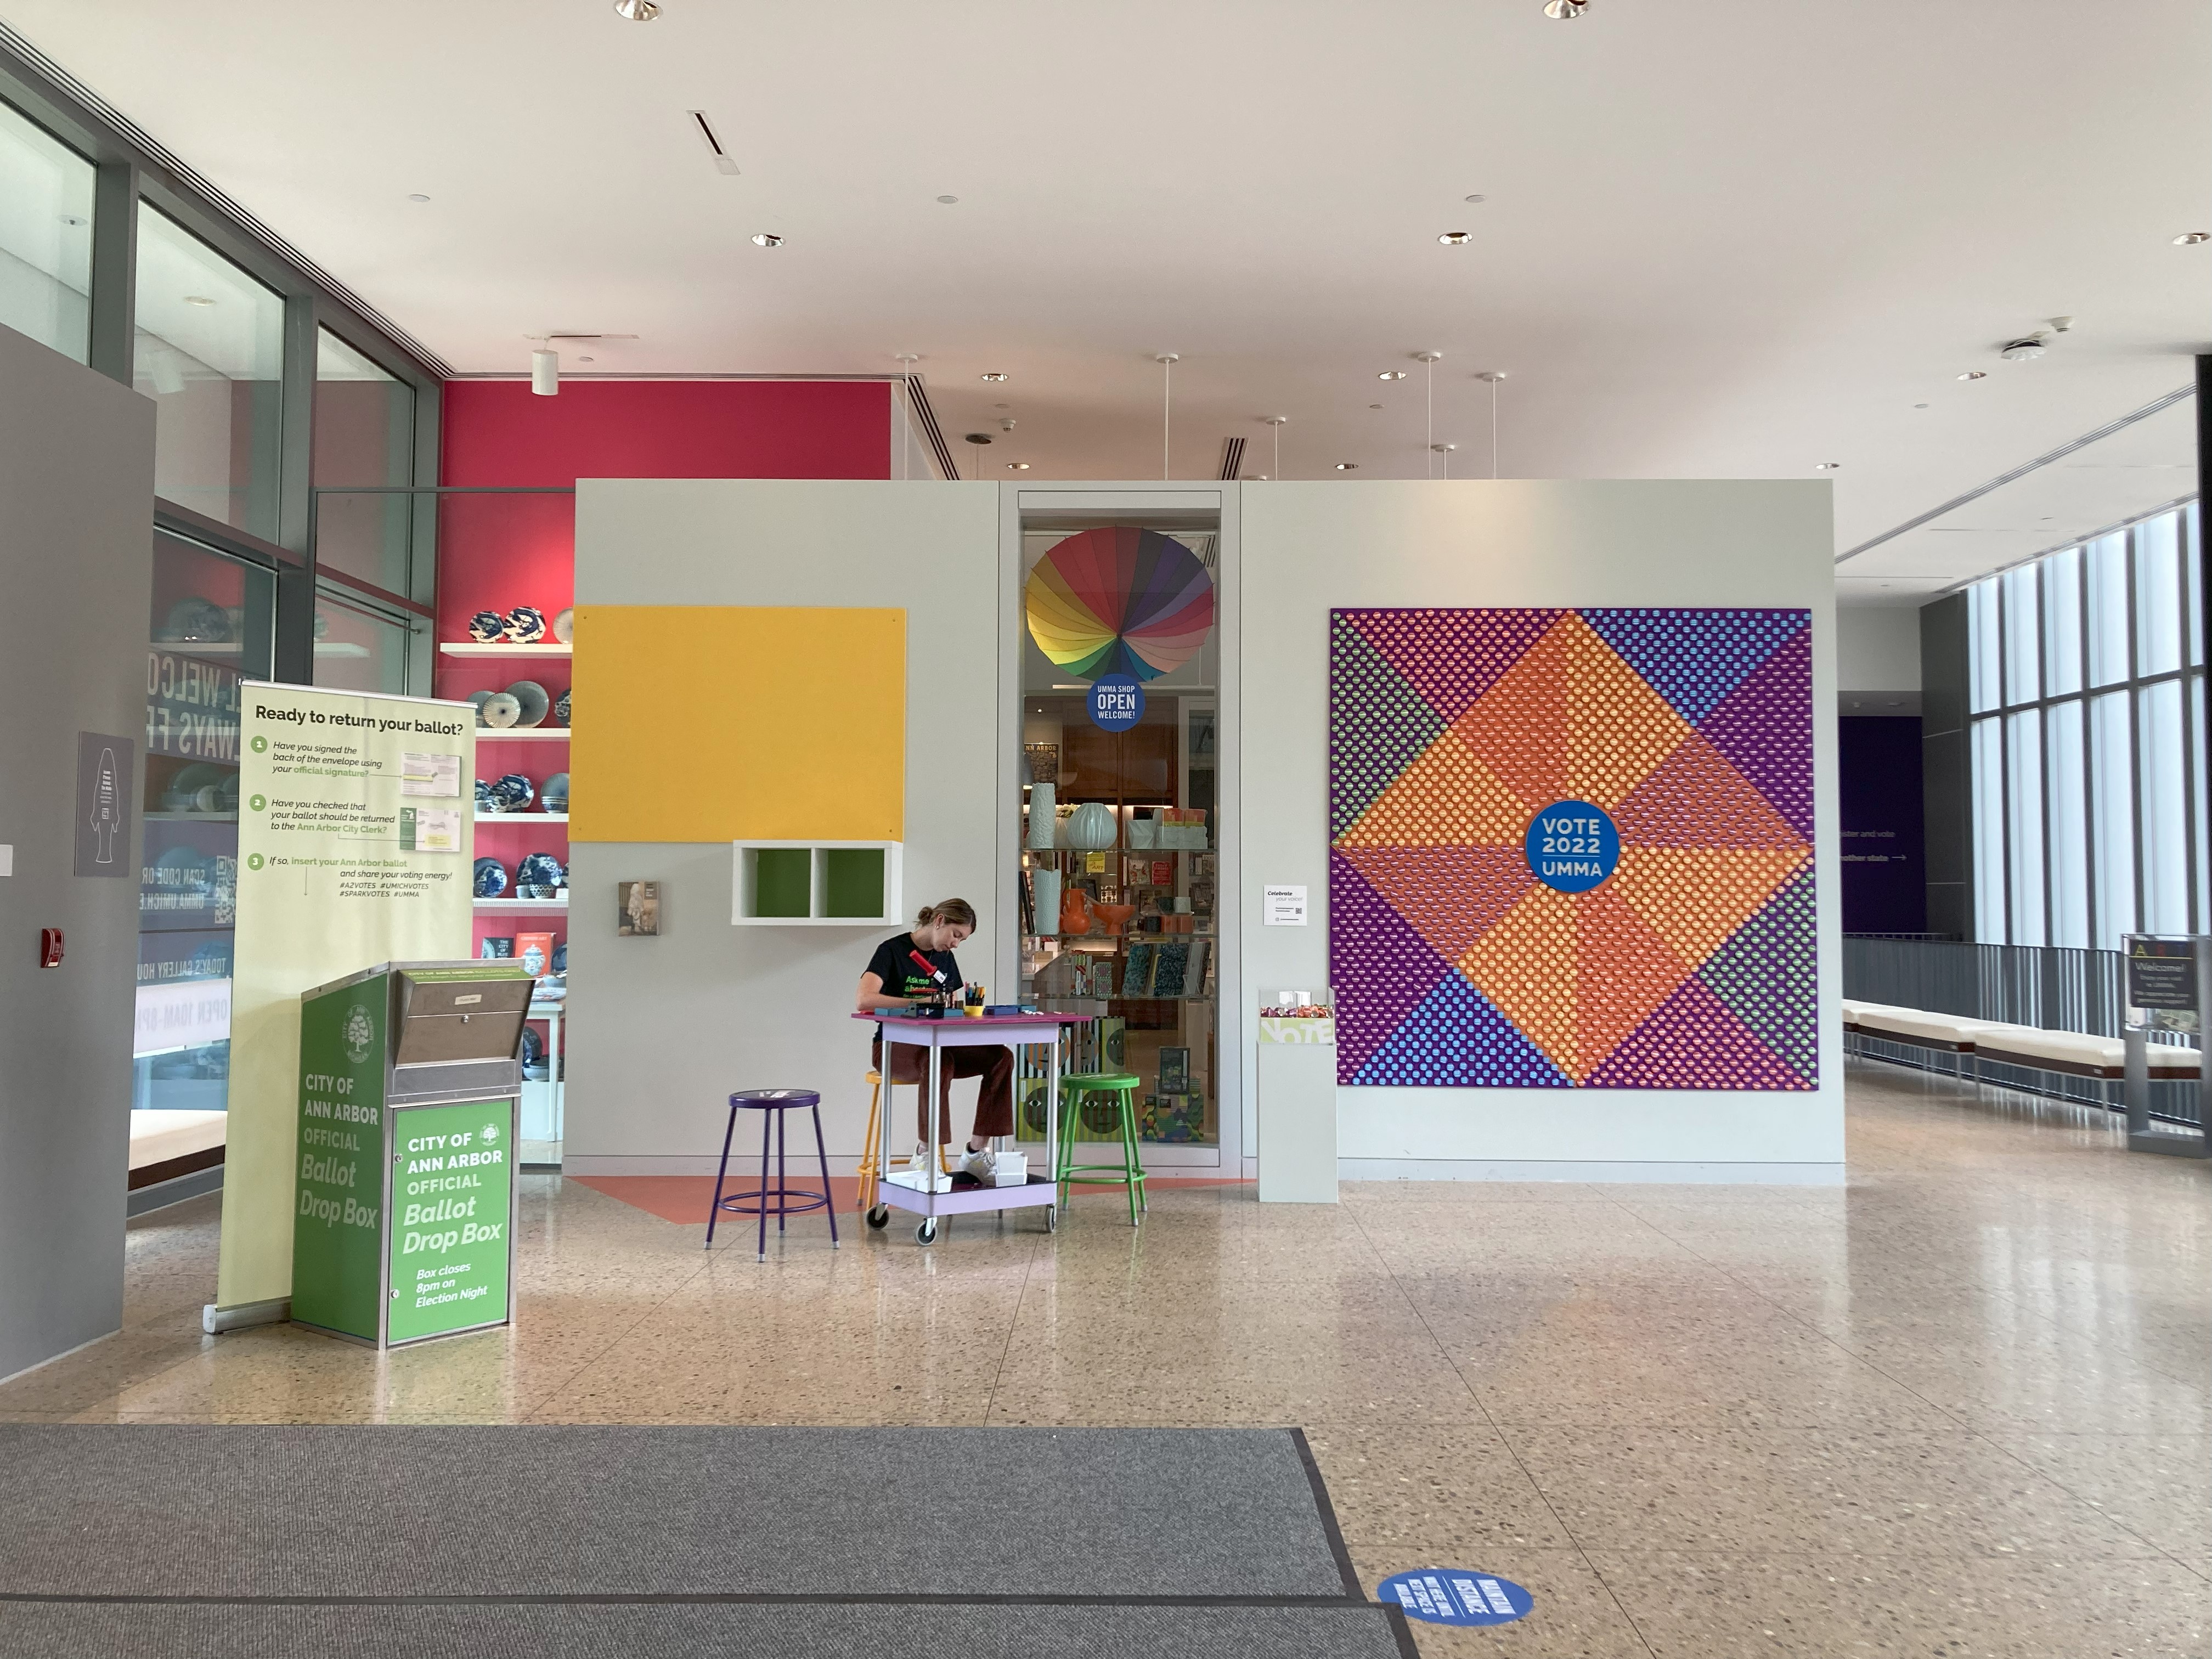 Mural, button making cart, and drop box at UMMA, 2022. Photo Credit: Creative Campus Voting Project